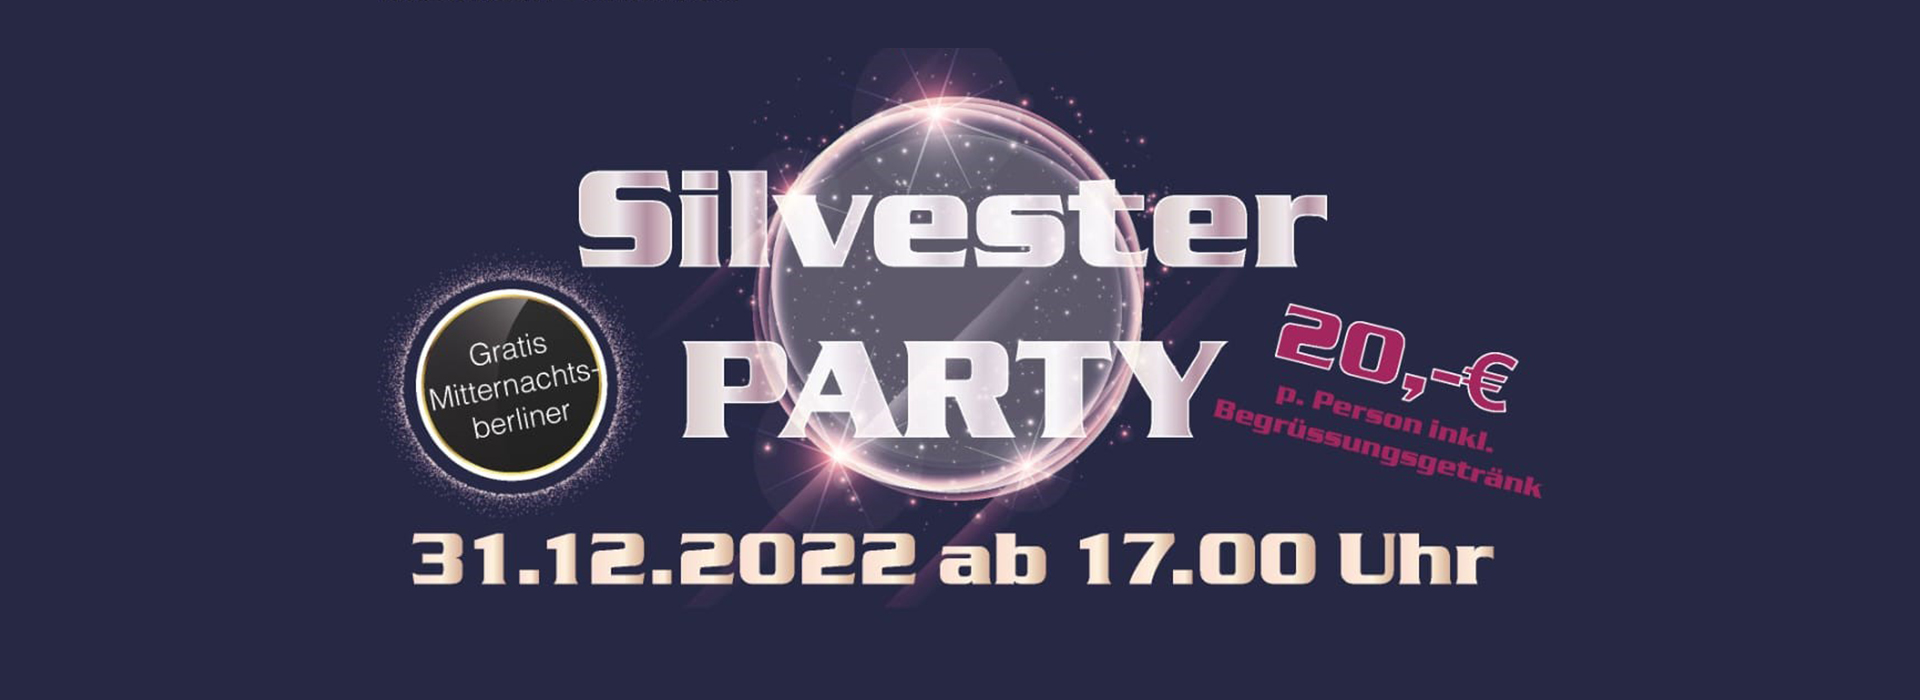 Silvester PARTY